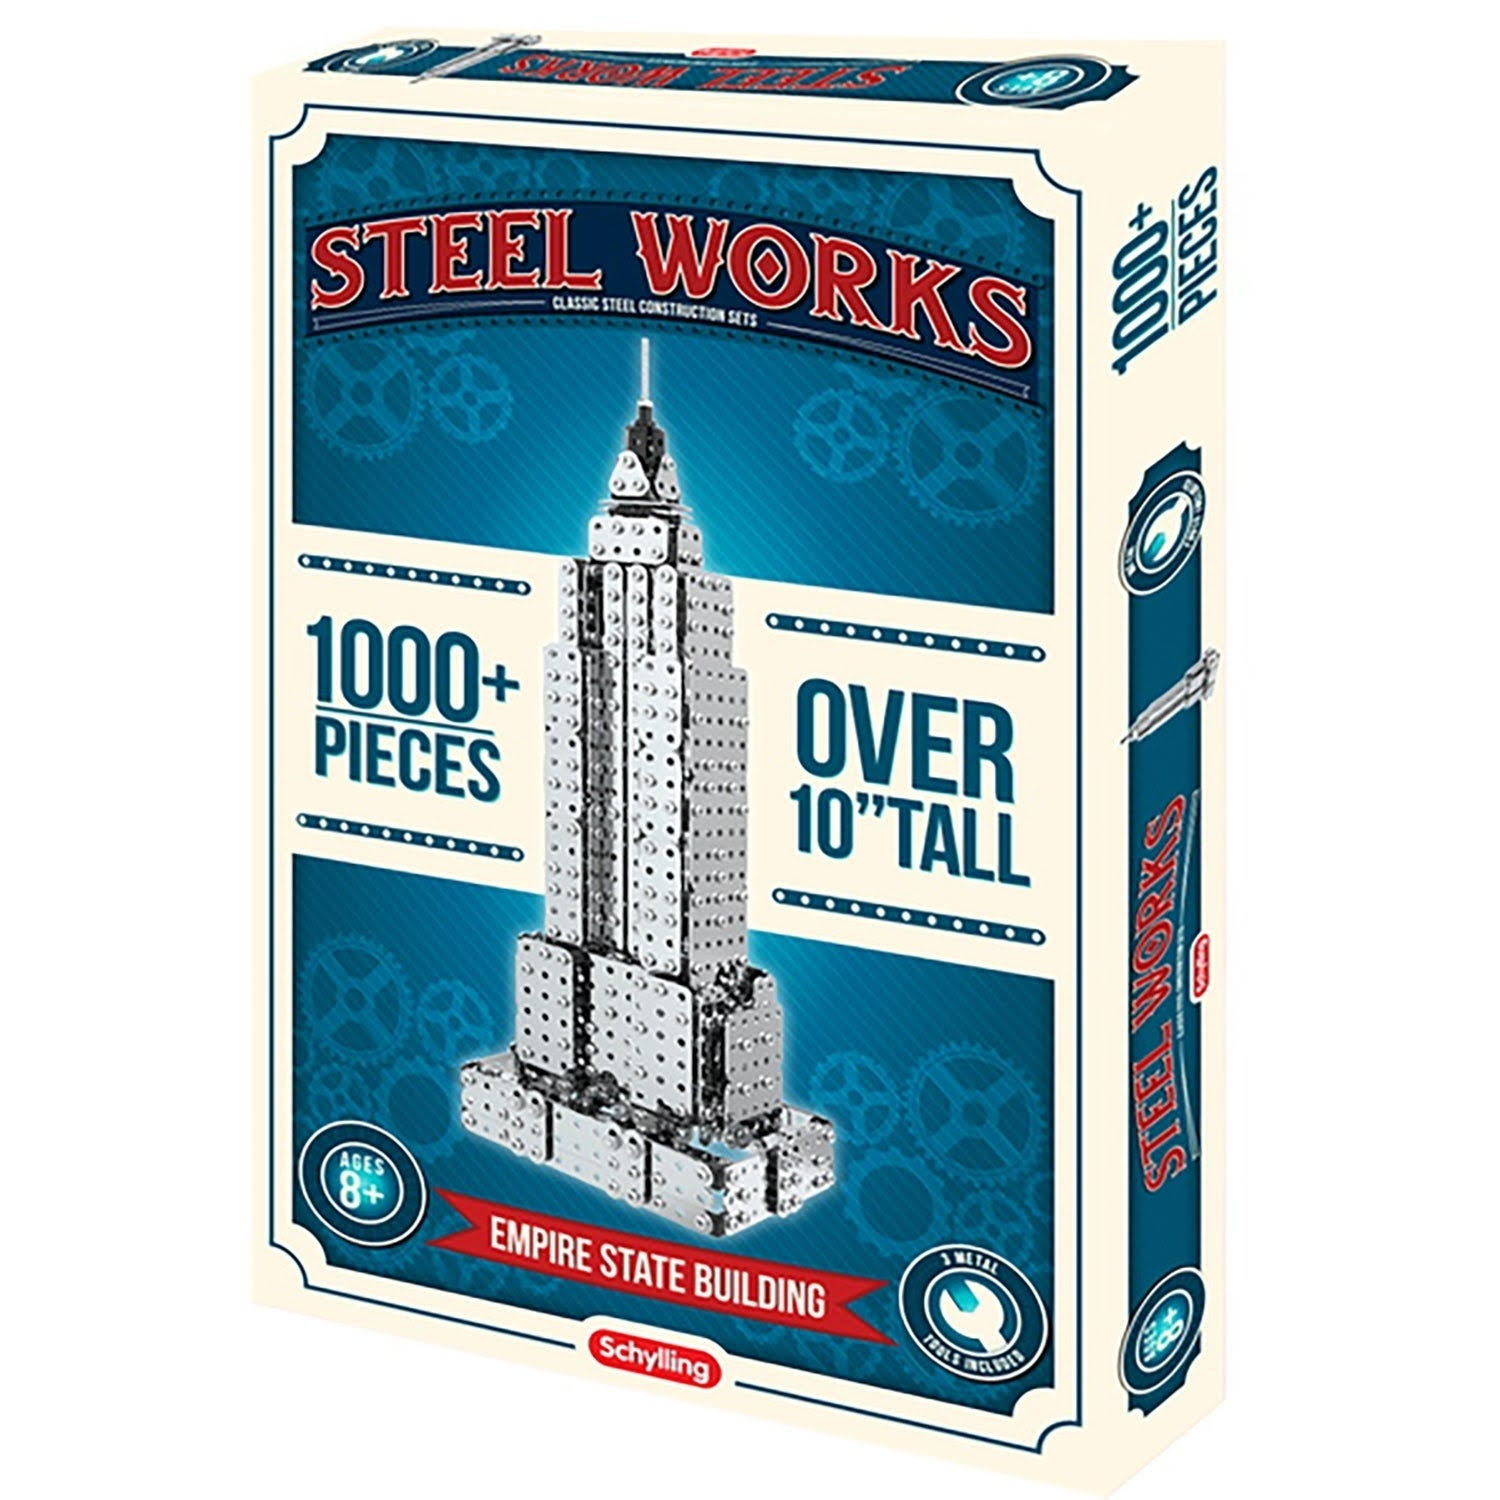 Schylling Steel Works Empire State Building Construction Set